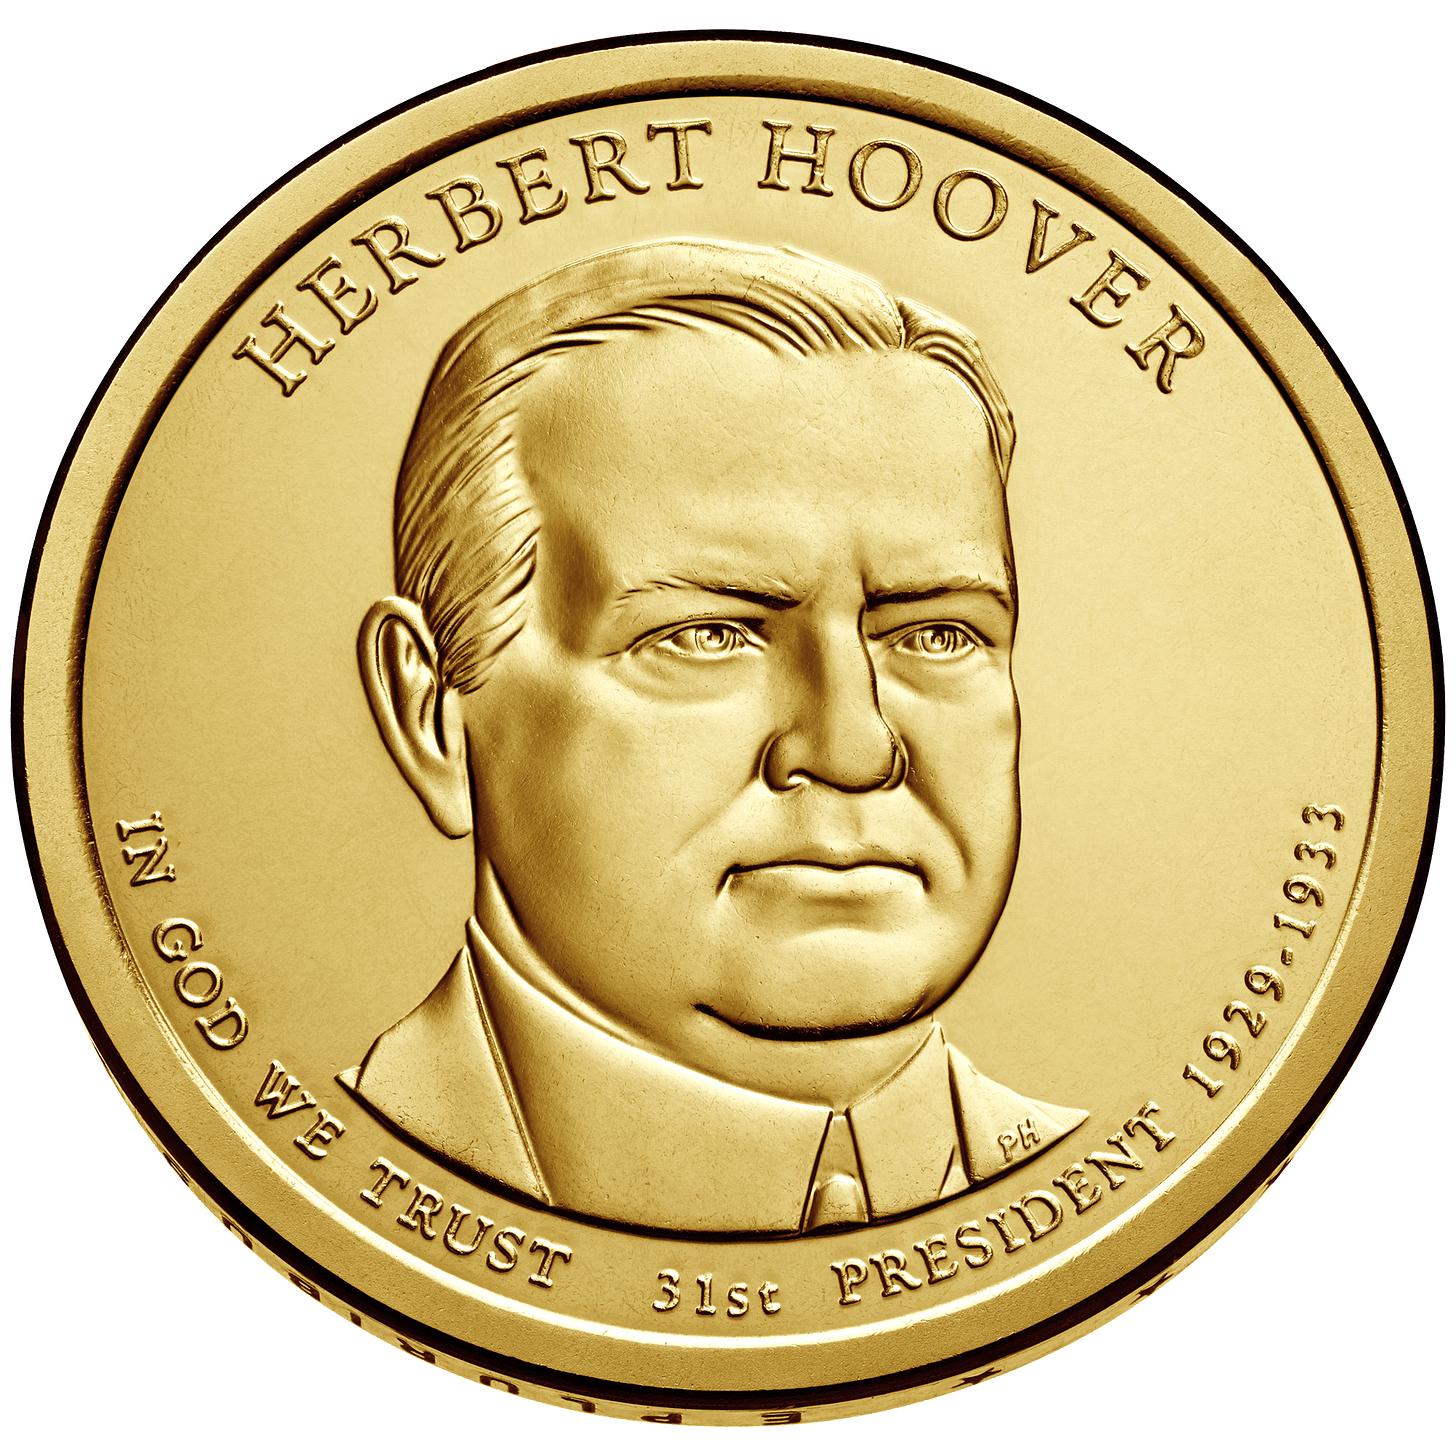 Commemorative coin depicting President Hoover, because that is a thing the U.S. Mint actually did for some reason? https://www.usmint.gov/coins/coin-medal-programs/presidential-dollar-coin/herbert-hoover